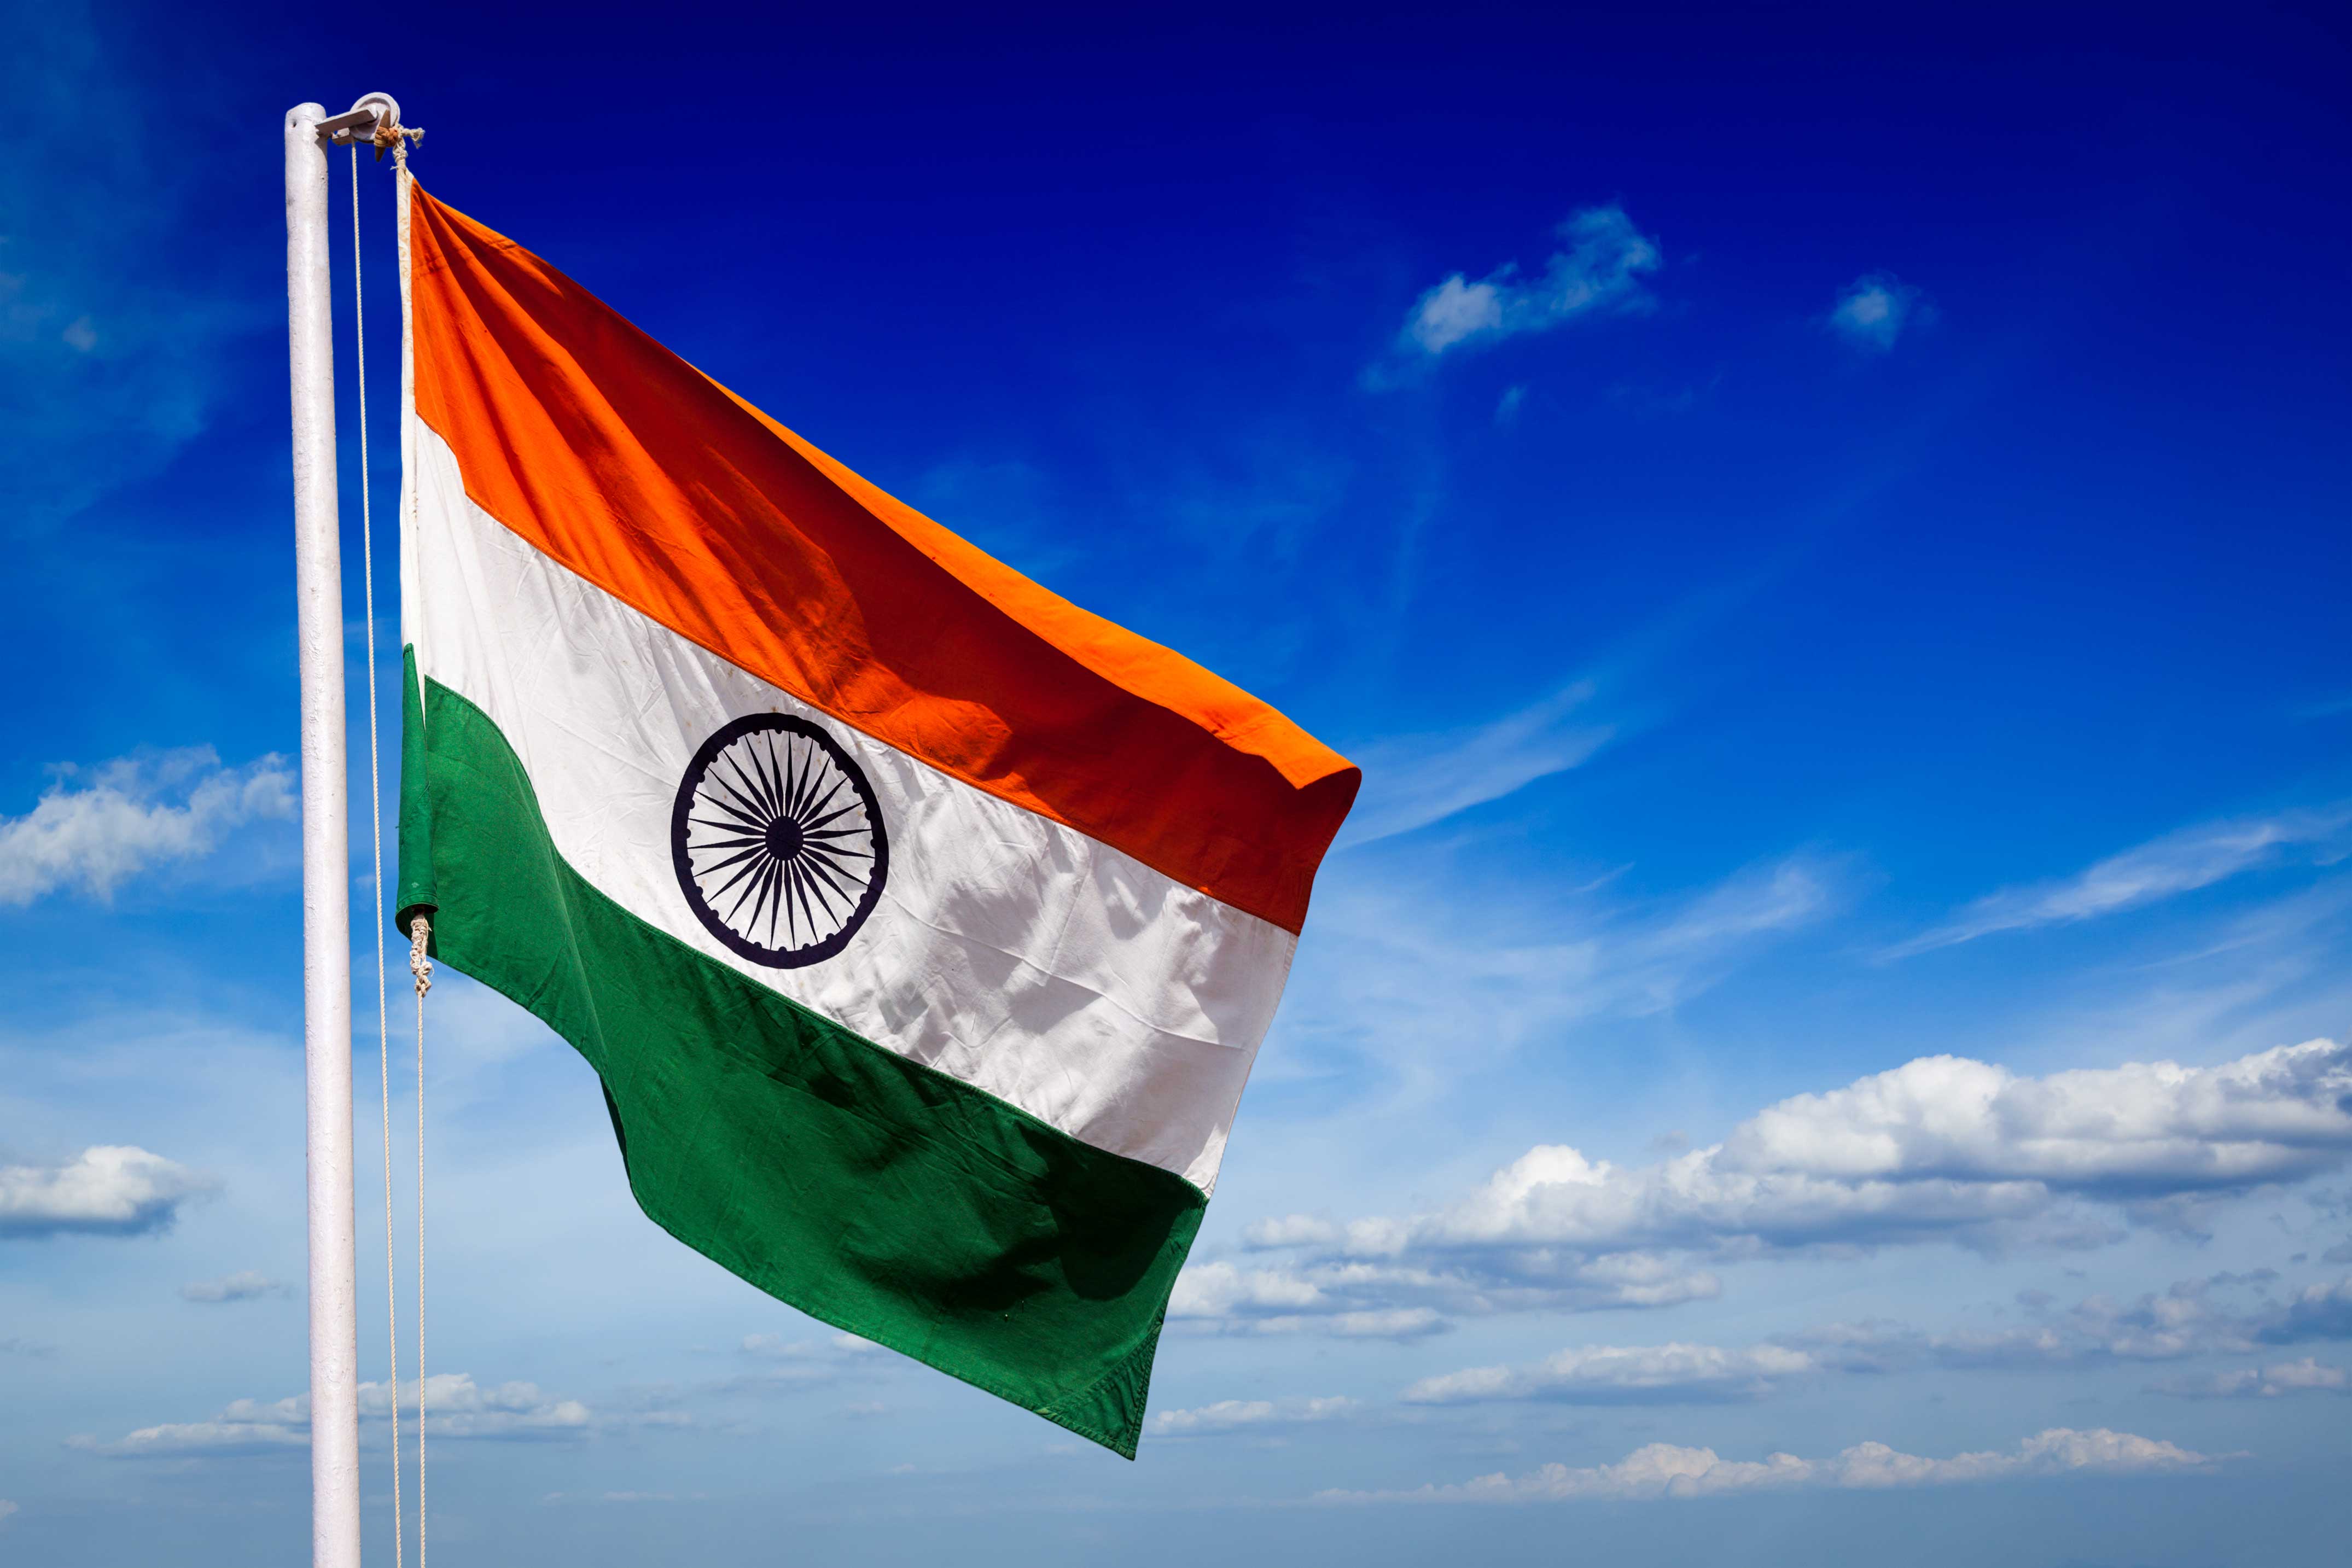 indian-flag-photos-hd-wallpapers-download-free-15-Aug-2020